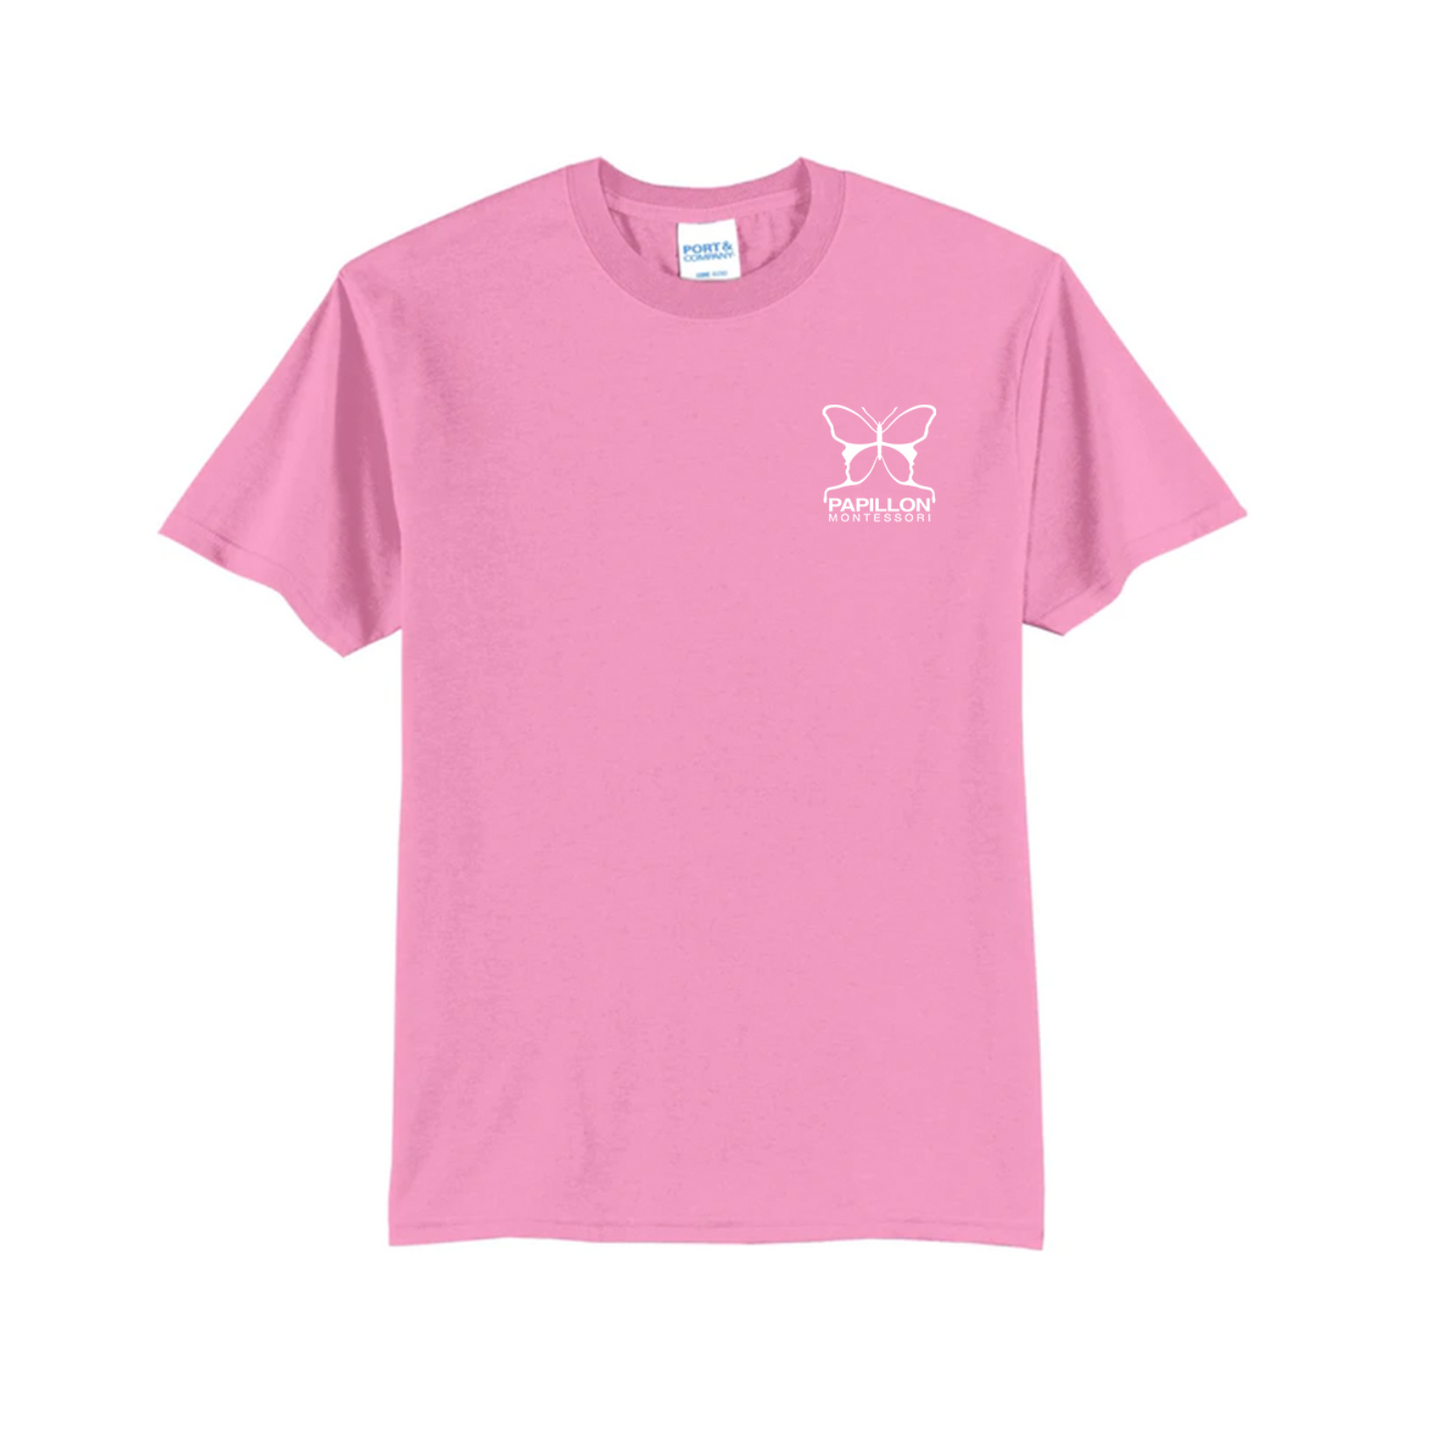 CREW NECK T-SHIRT (PINK) - UPPER ELEMENTARY / MIDDLE